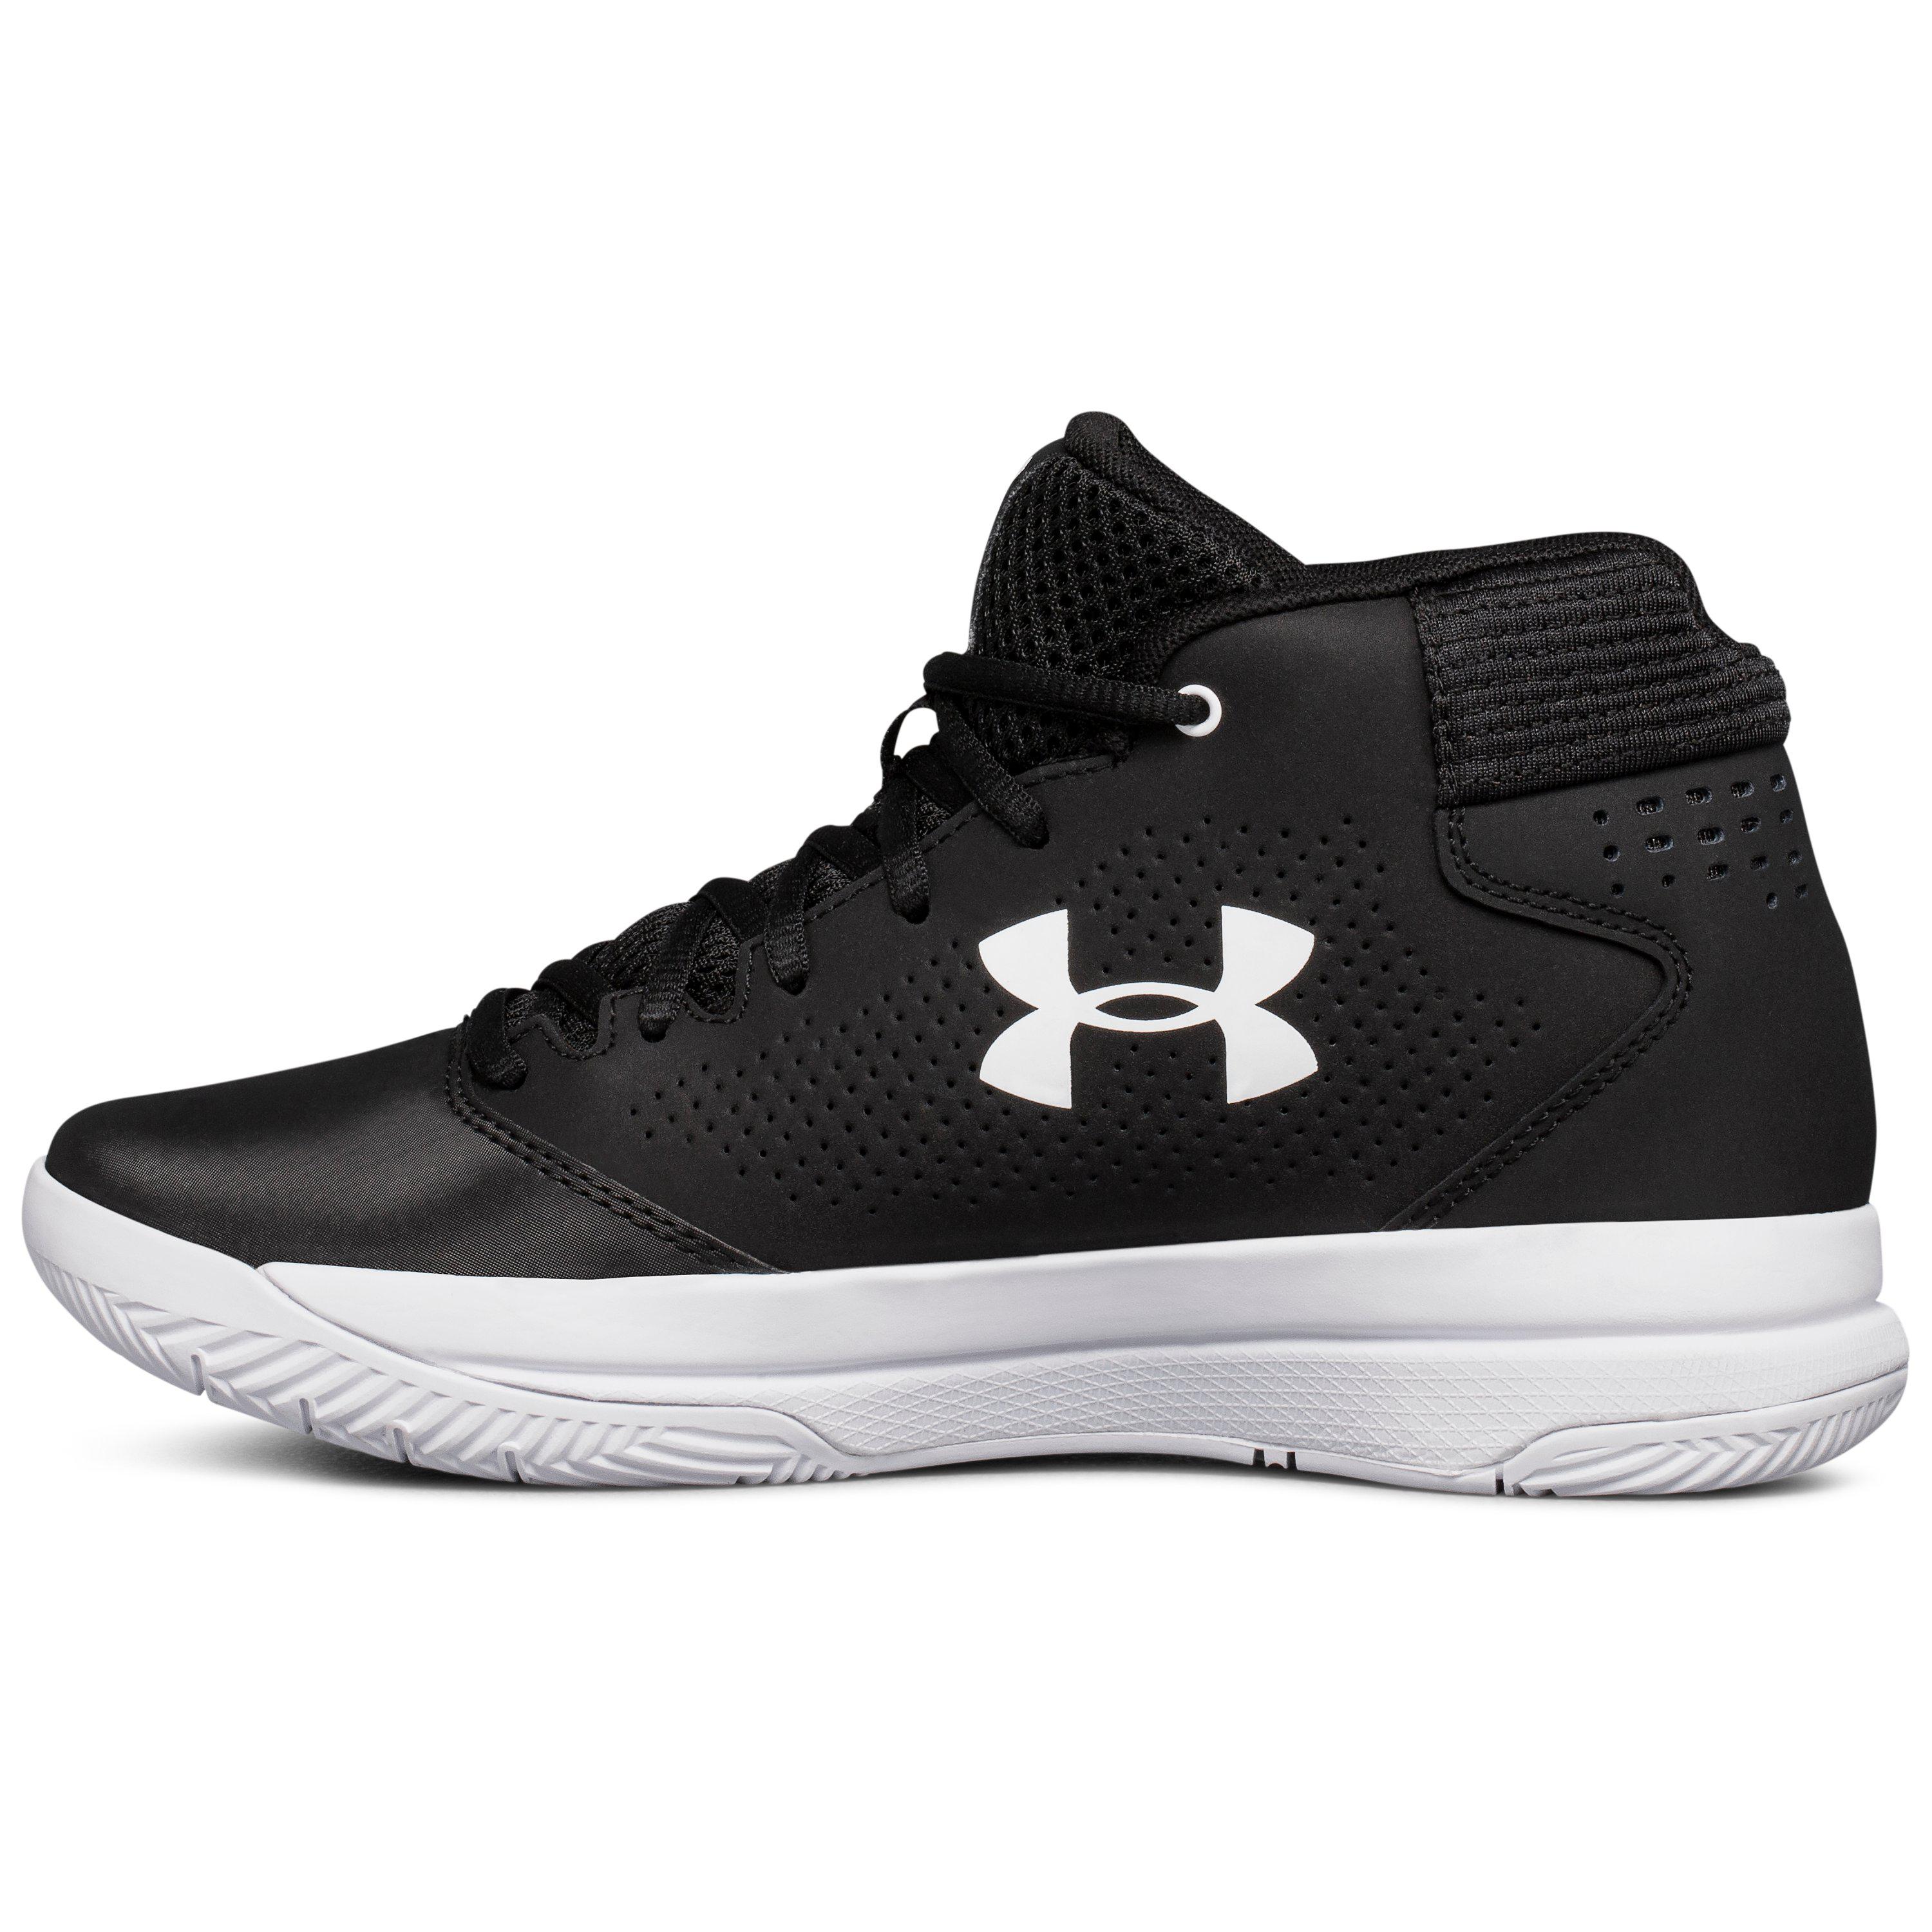 Under Armour Women's Ua Jet 2017 Basketball Shoes in Black | Lyst